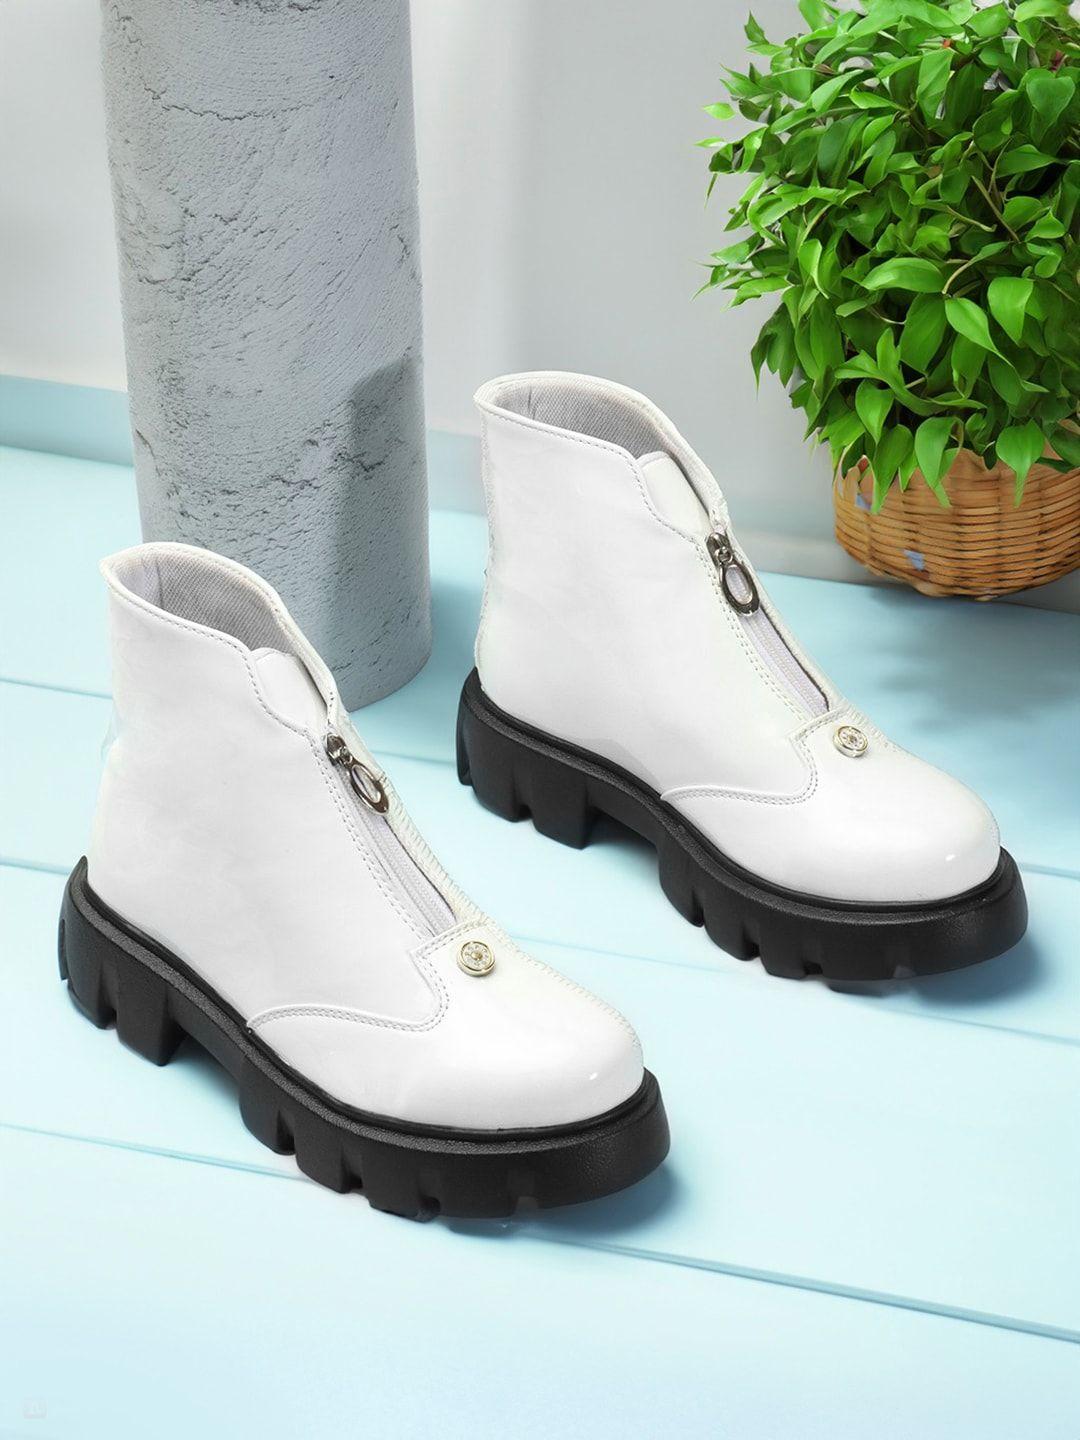 the roadster lifestyle co. women white mid top platform heel chunky boots with zip